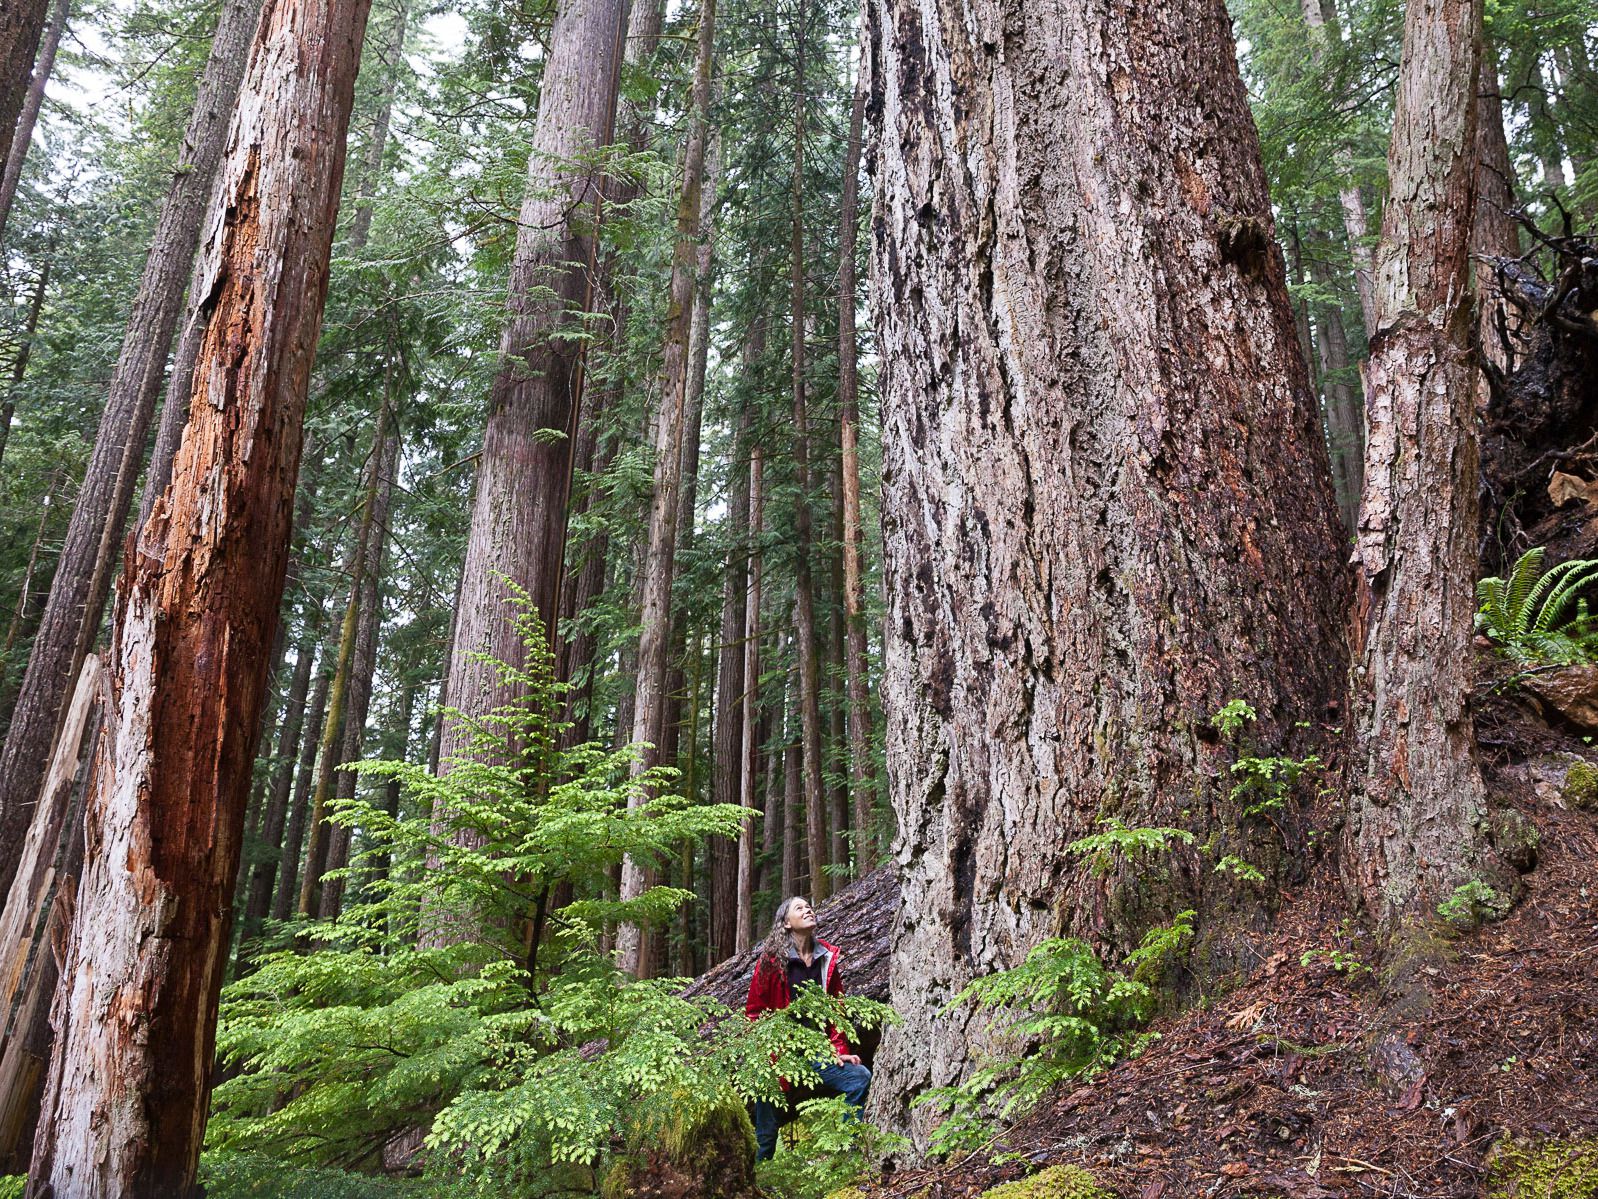 Gaby Wickstrom: Old growth logging ban would severely damage forest reliant communities